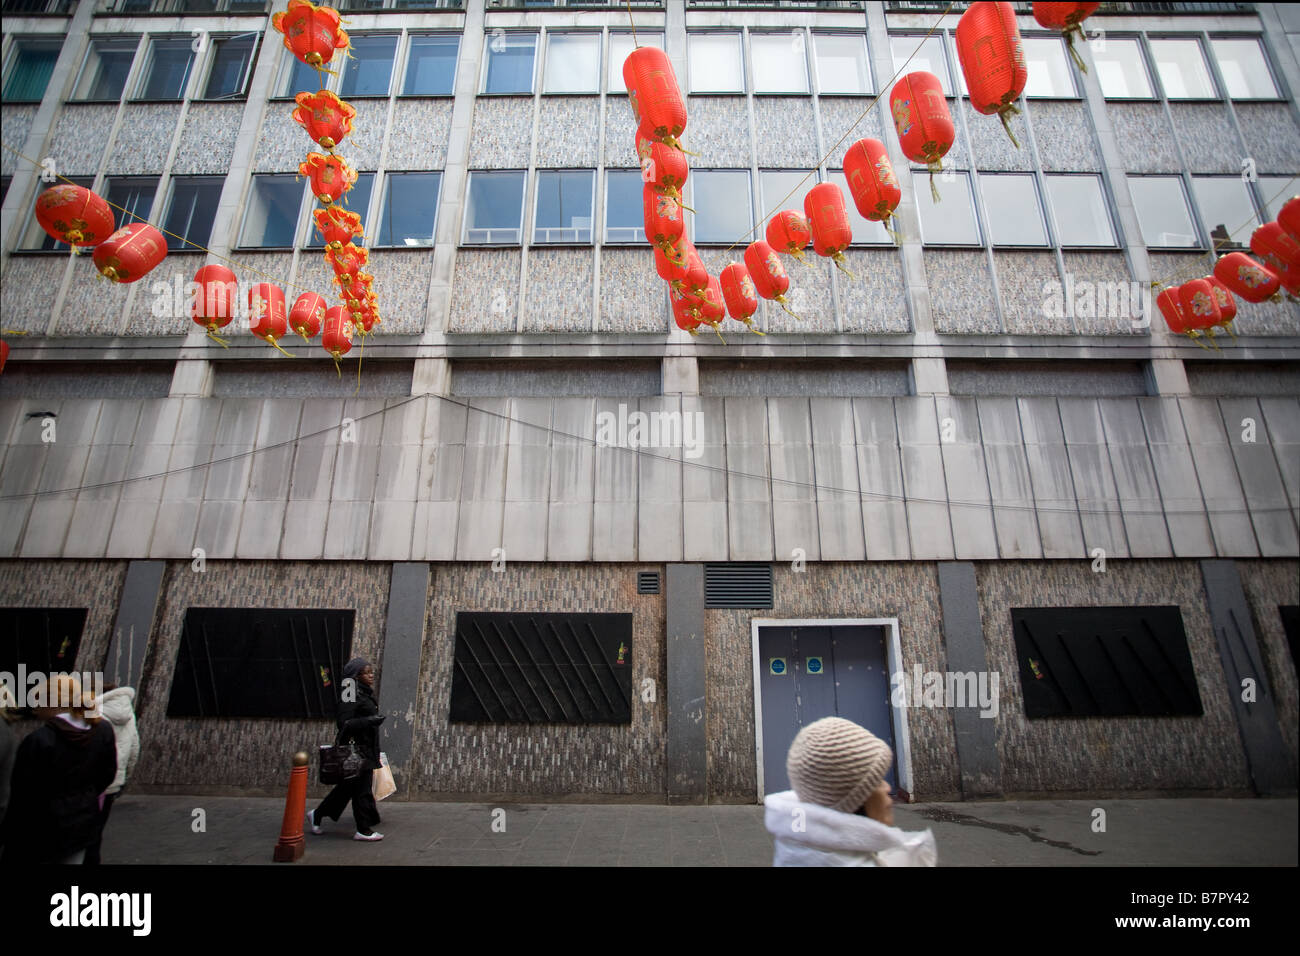 Street scene at Chinese New Year in London. Stock Photo